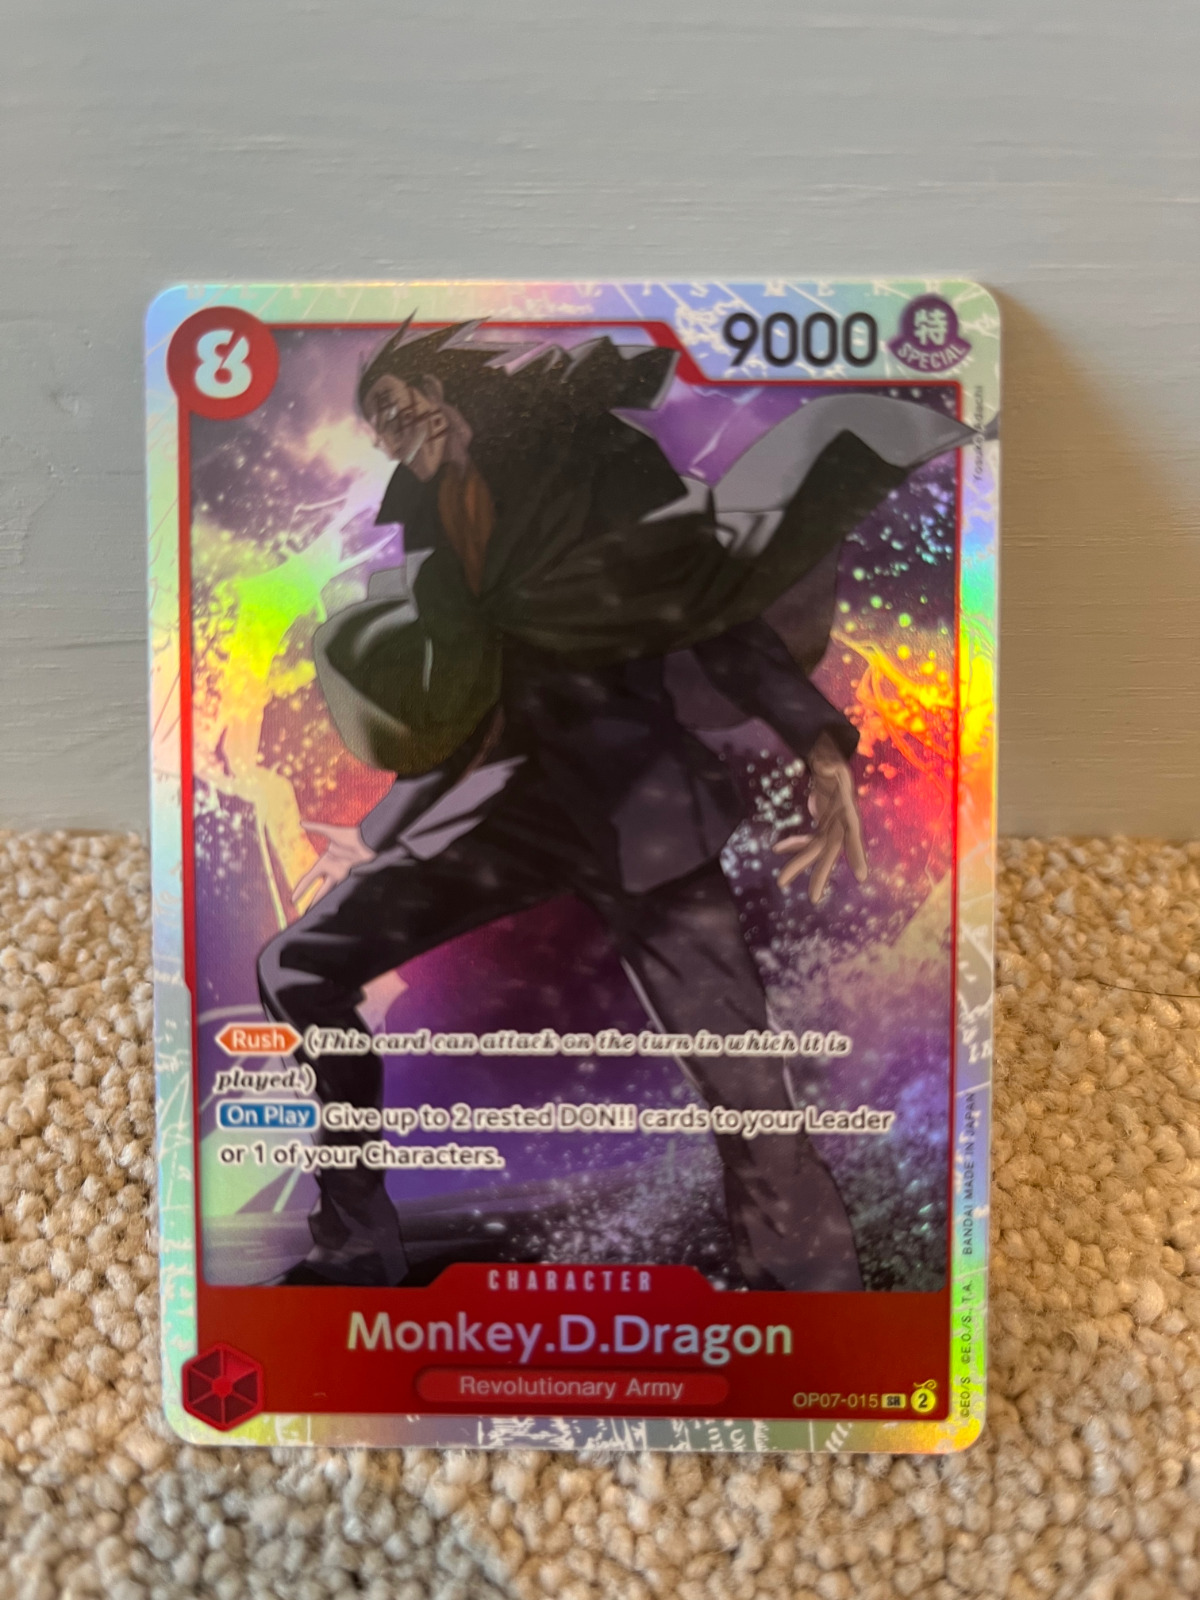 Monkey.D.Dragon OP07-015 - 500 Years into the Future - Super Rare One Piece #3